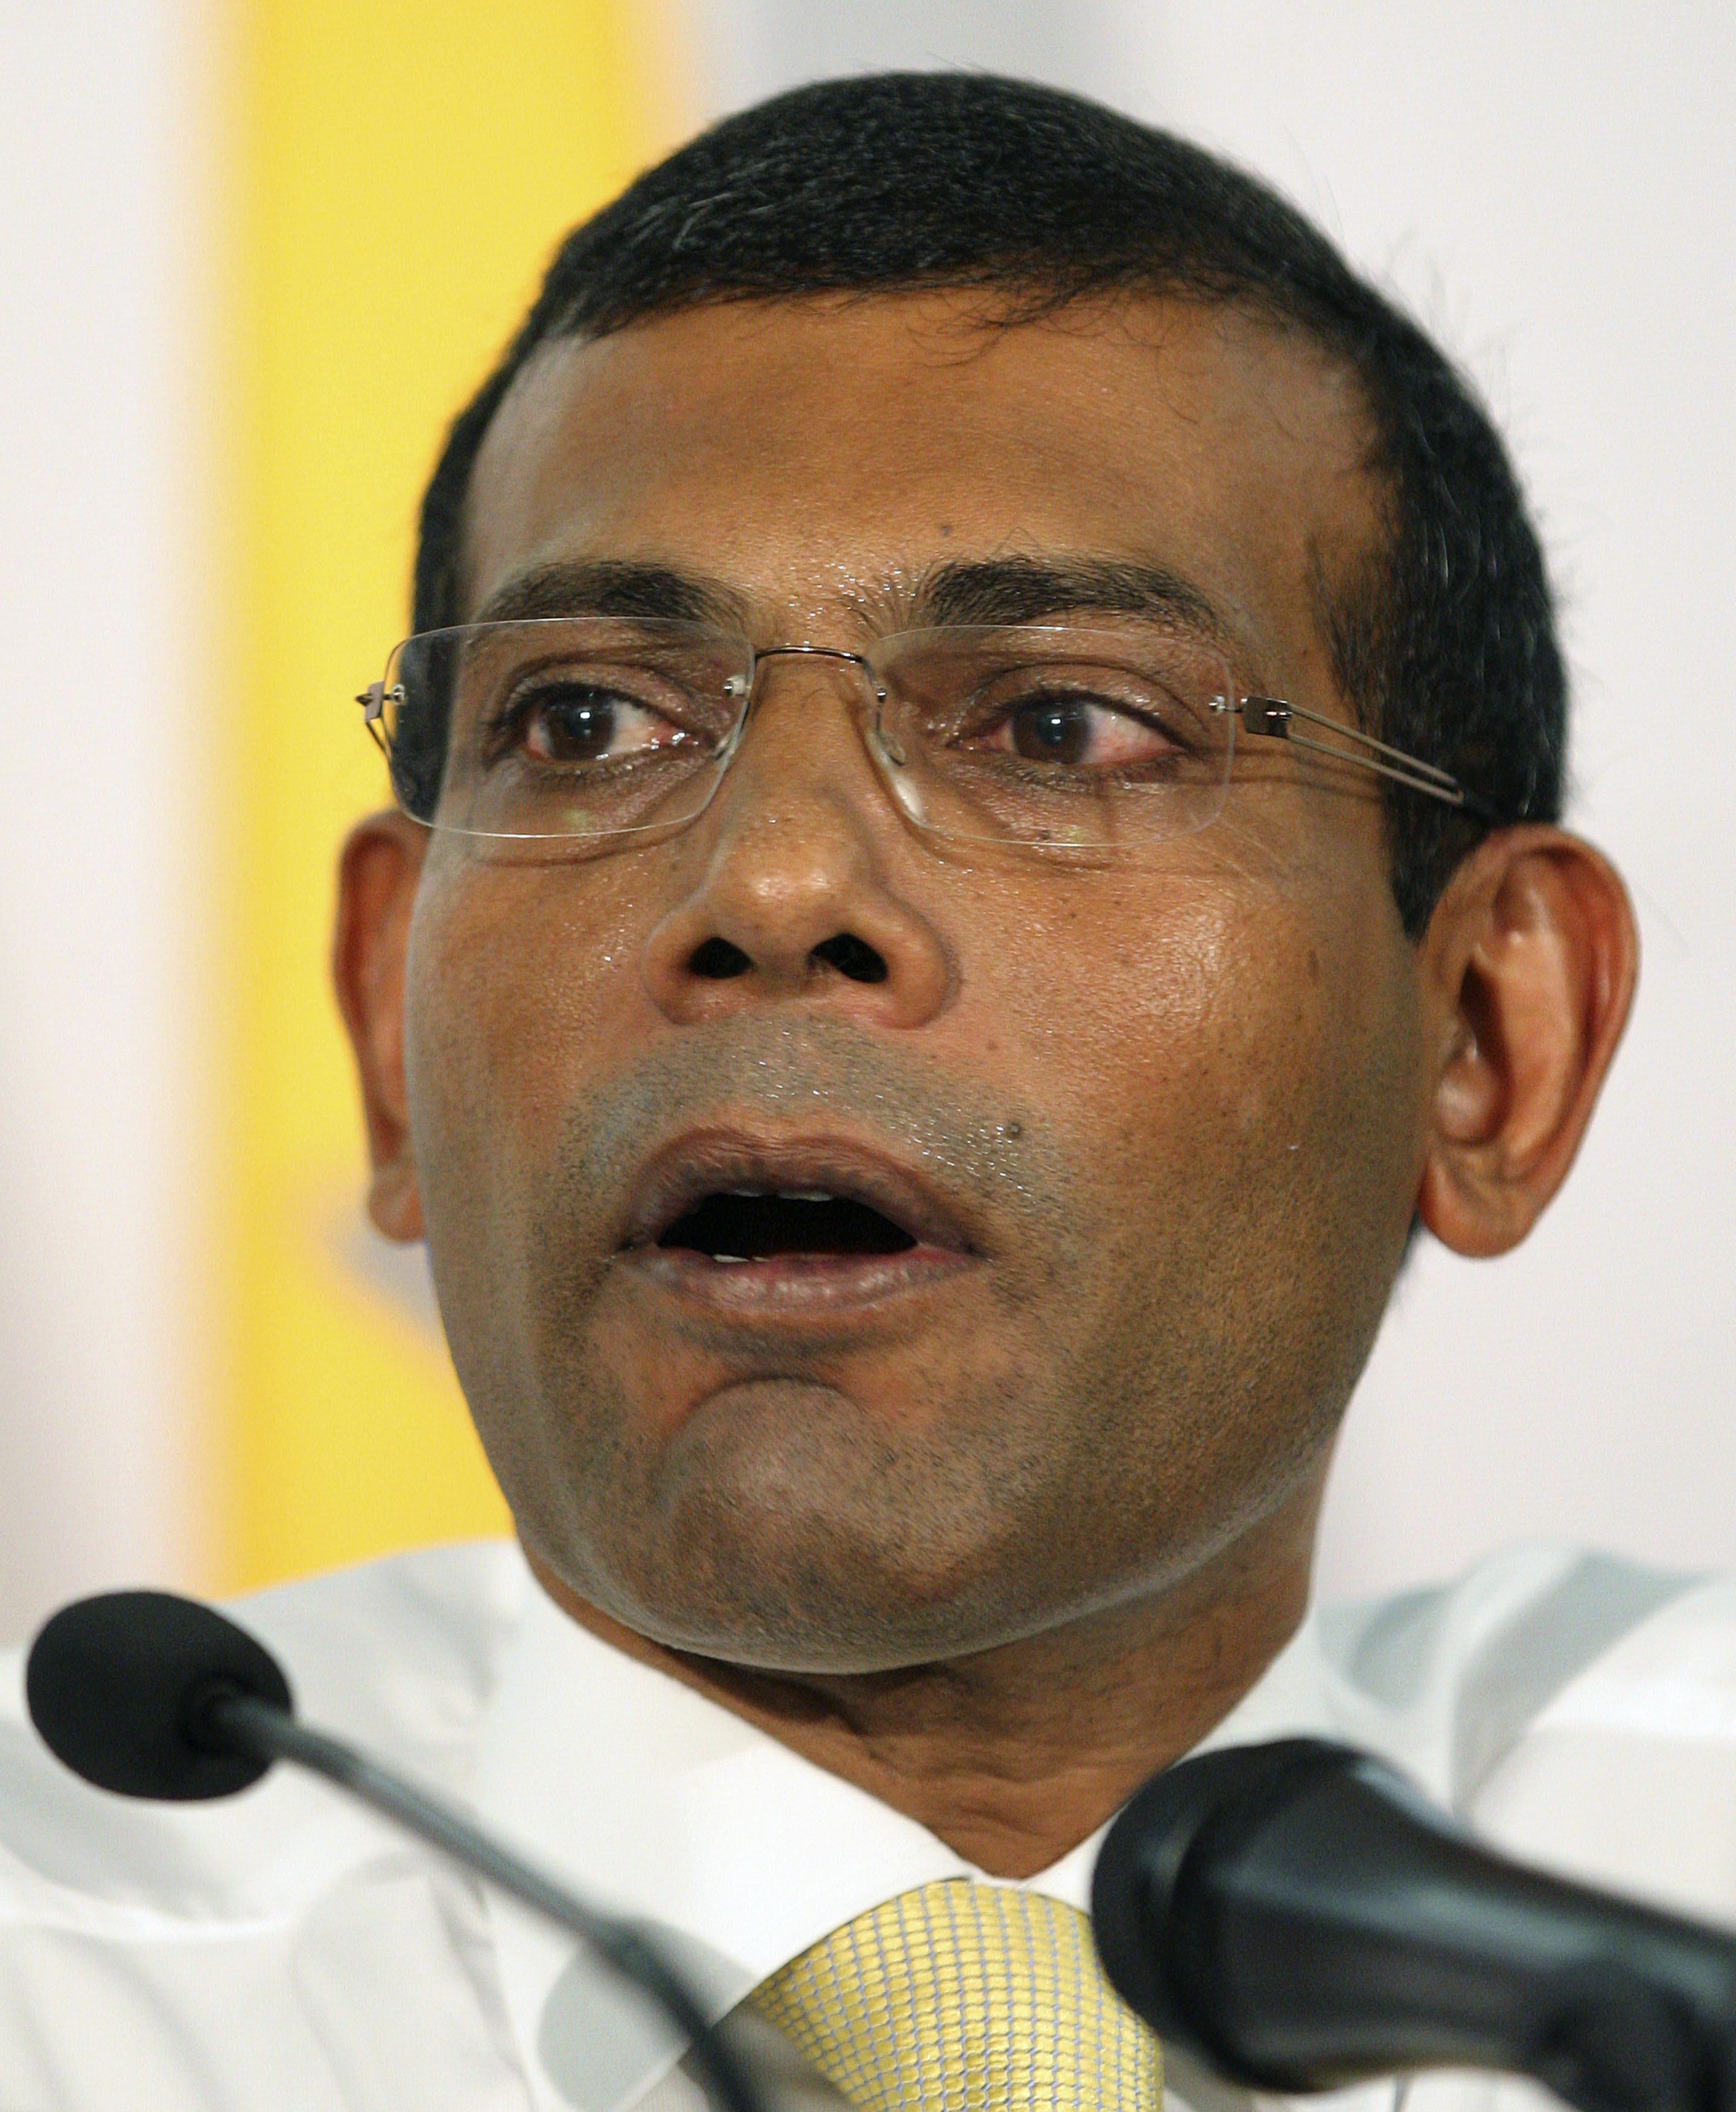 Maldivian Democratic Party presidential candidate Nasheed speaks to reporters during media conference in Male